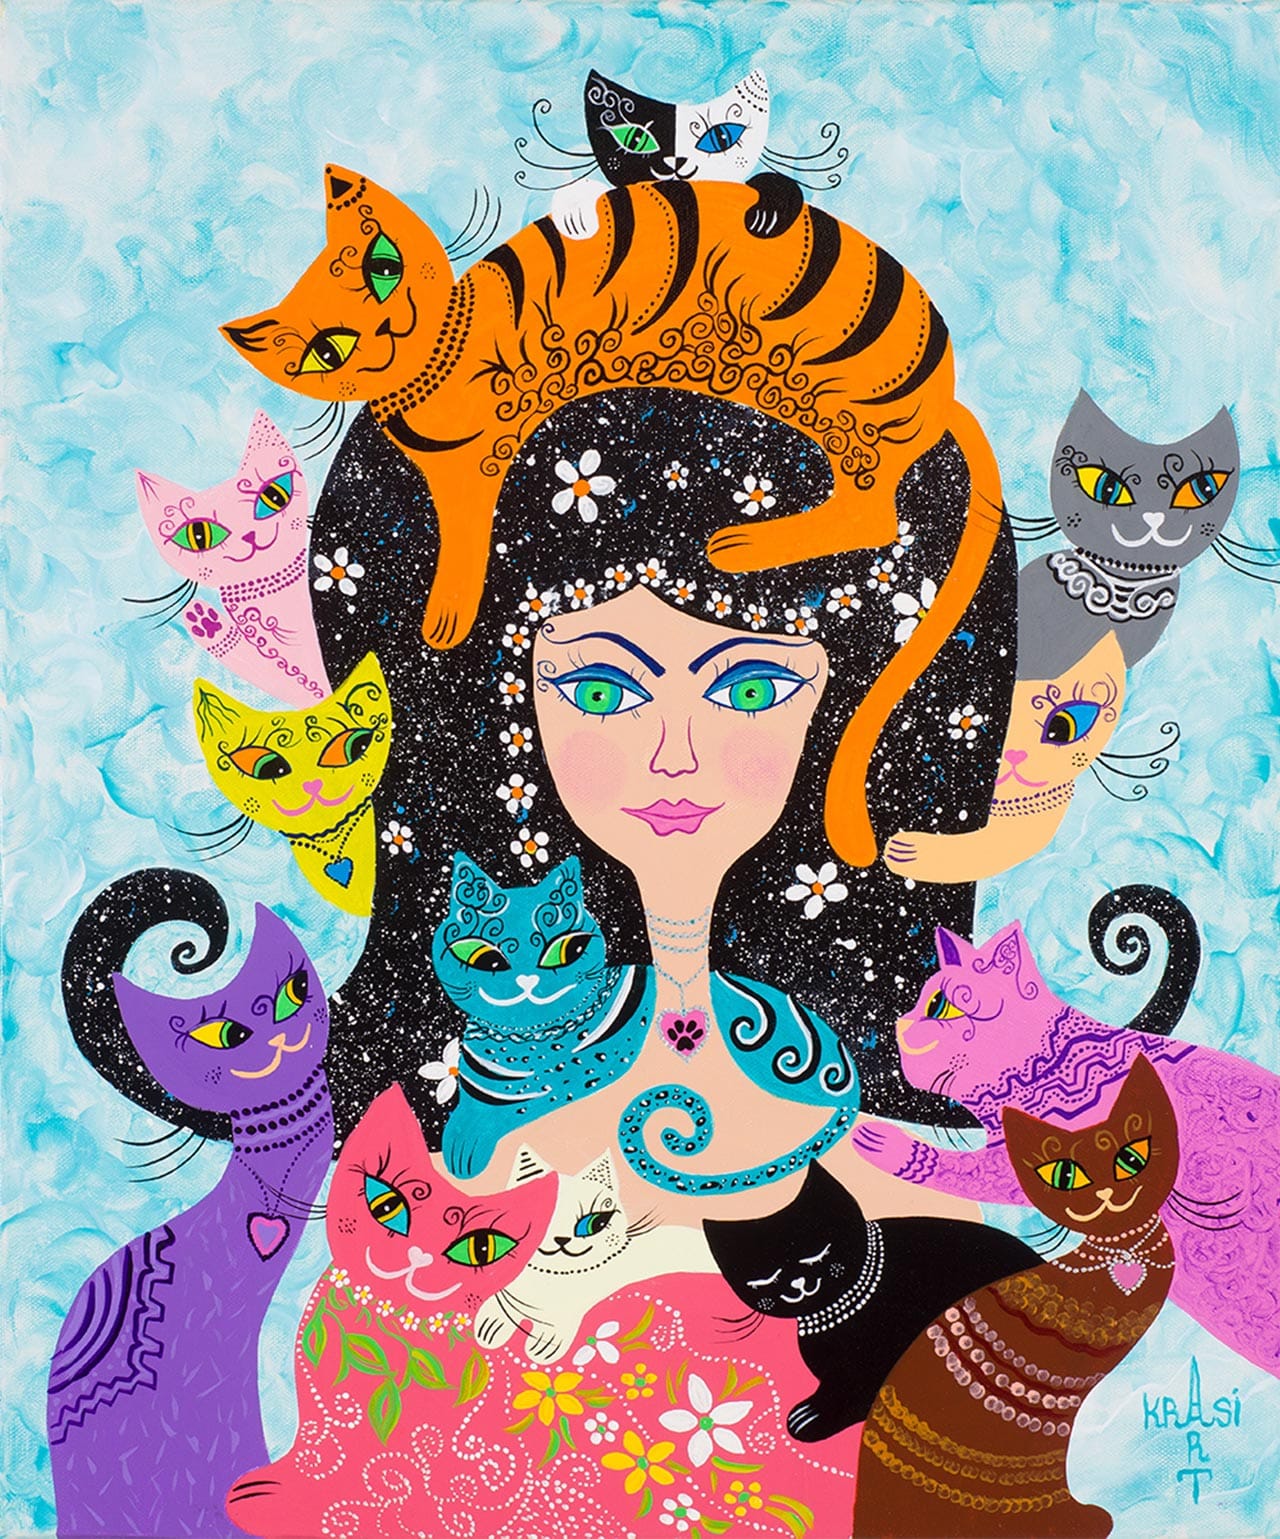 "A Crazy Cat Lady with her 13 Cats"